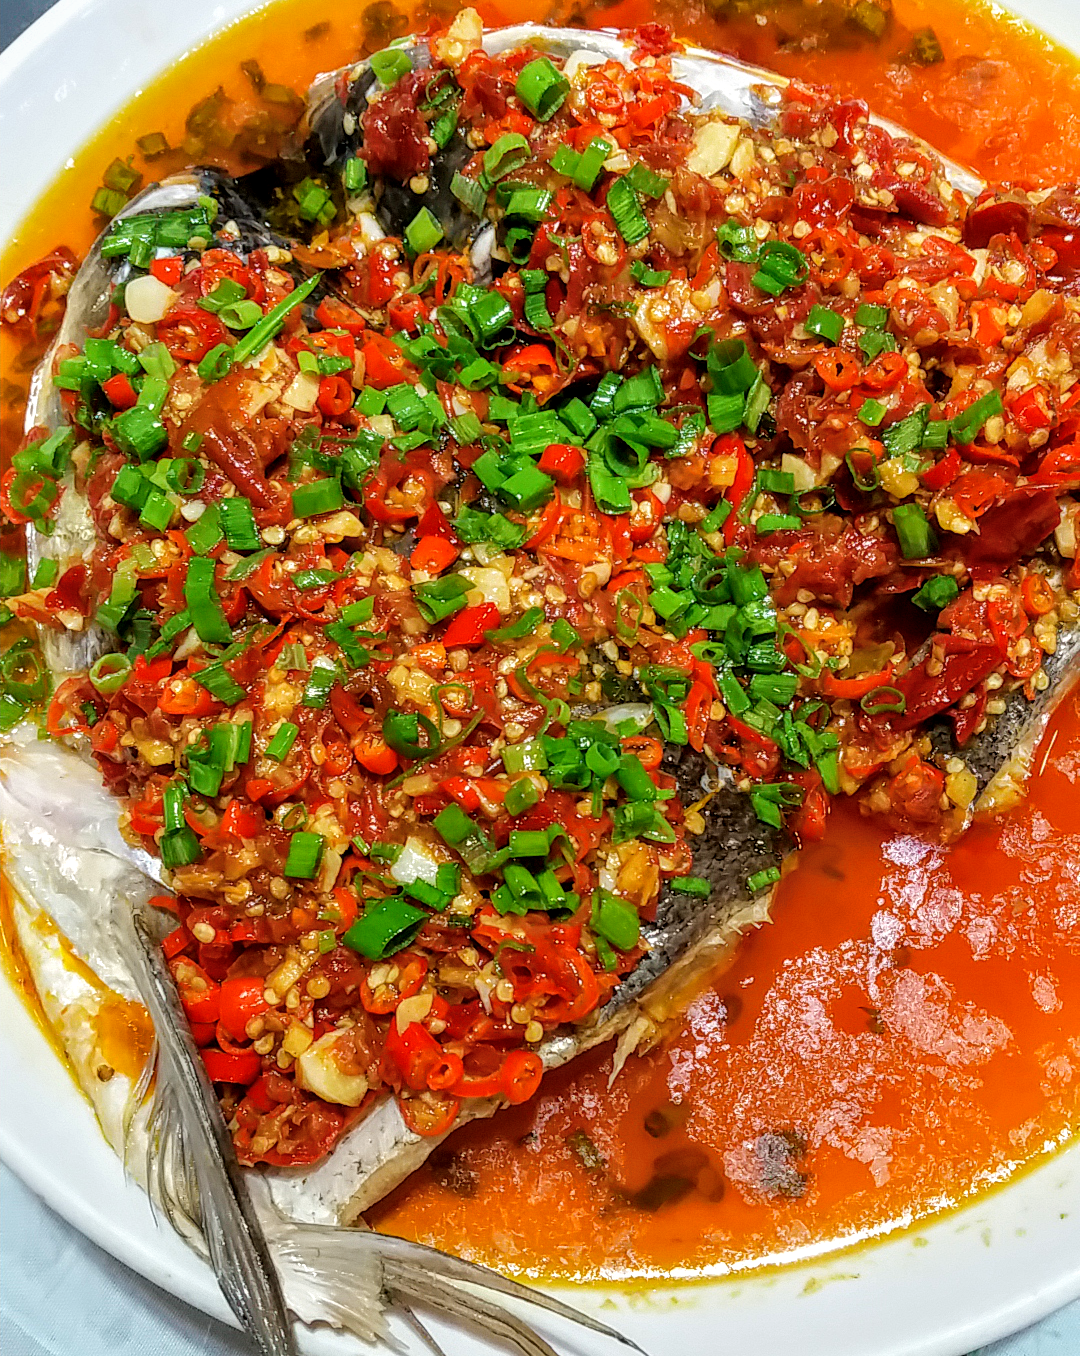 Steamed fish with chilli peppers